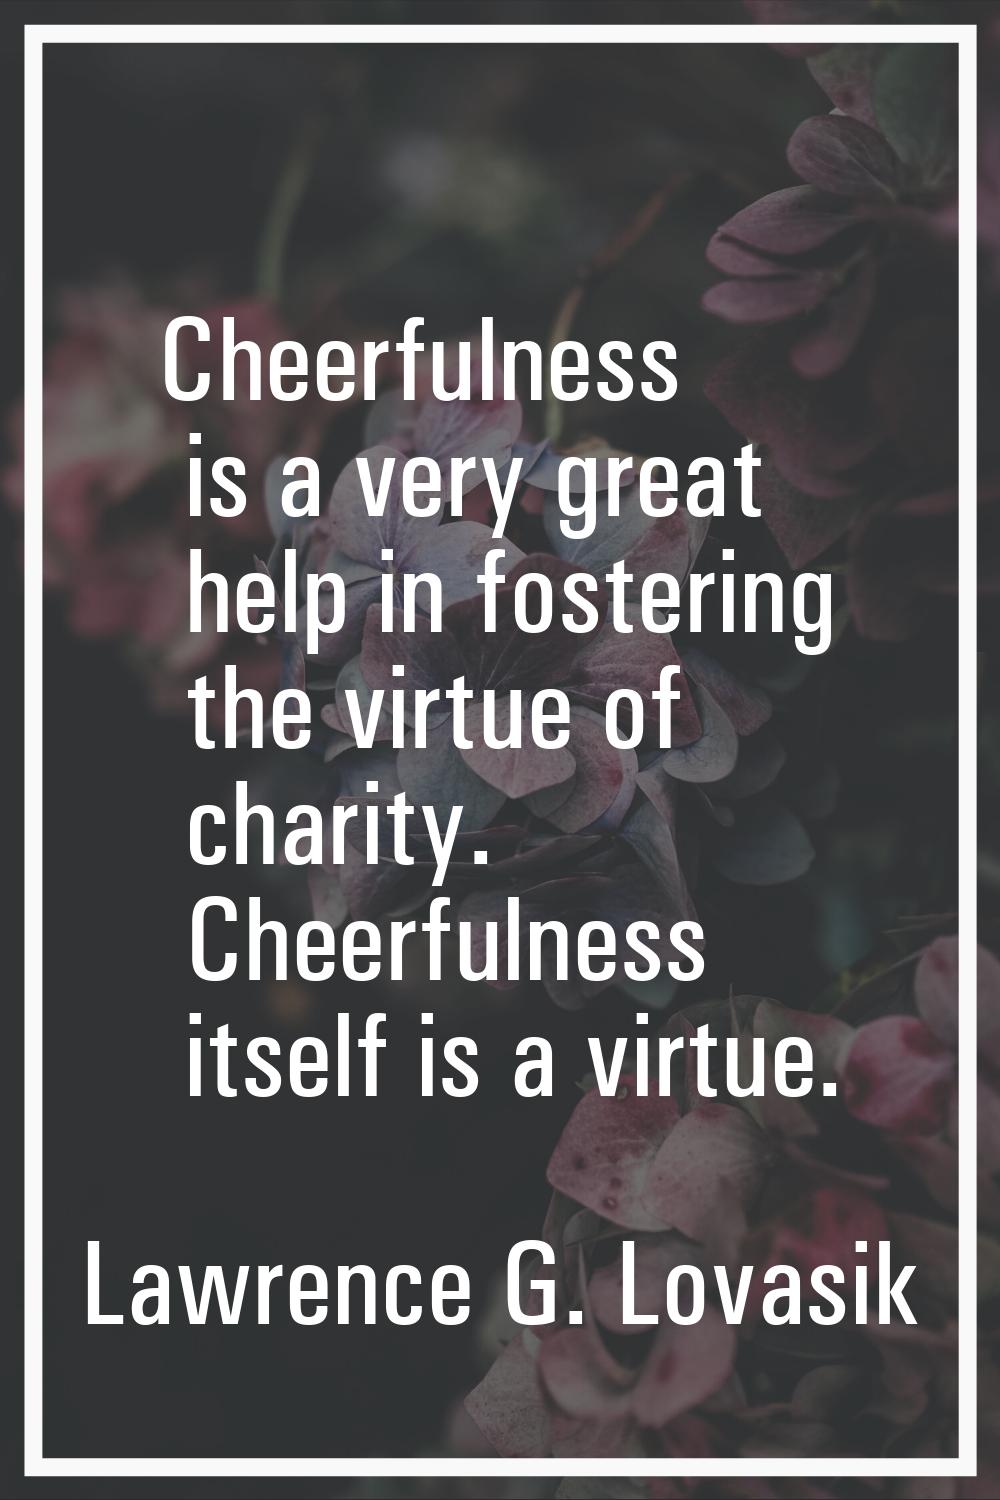 Cheerfulness is a very great help in fostering the virtue of charity. Cheerfulness itself is a virt